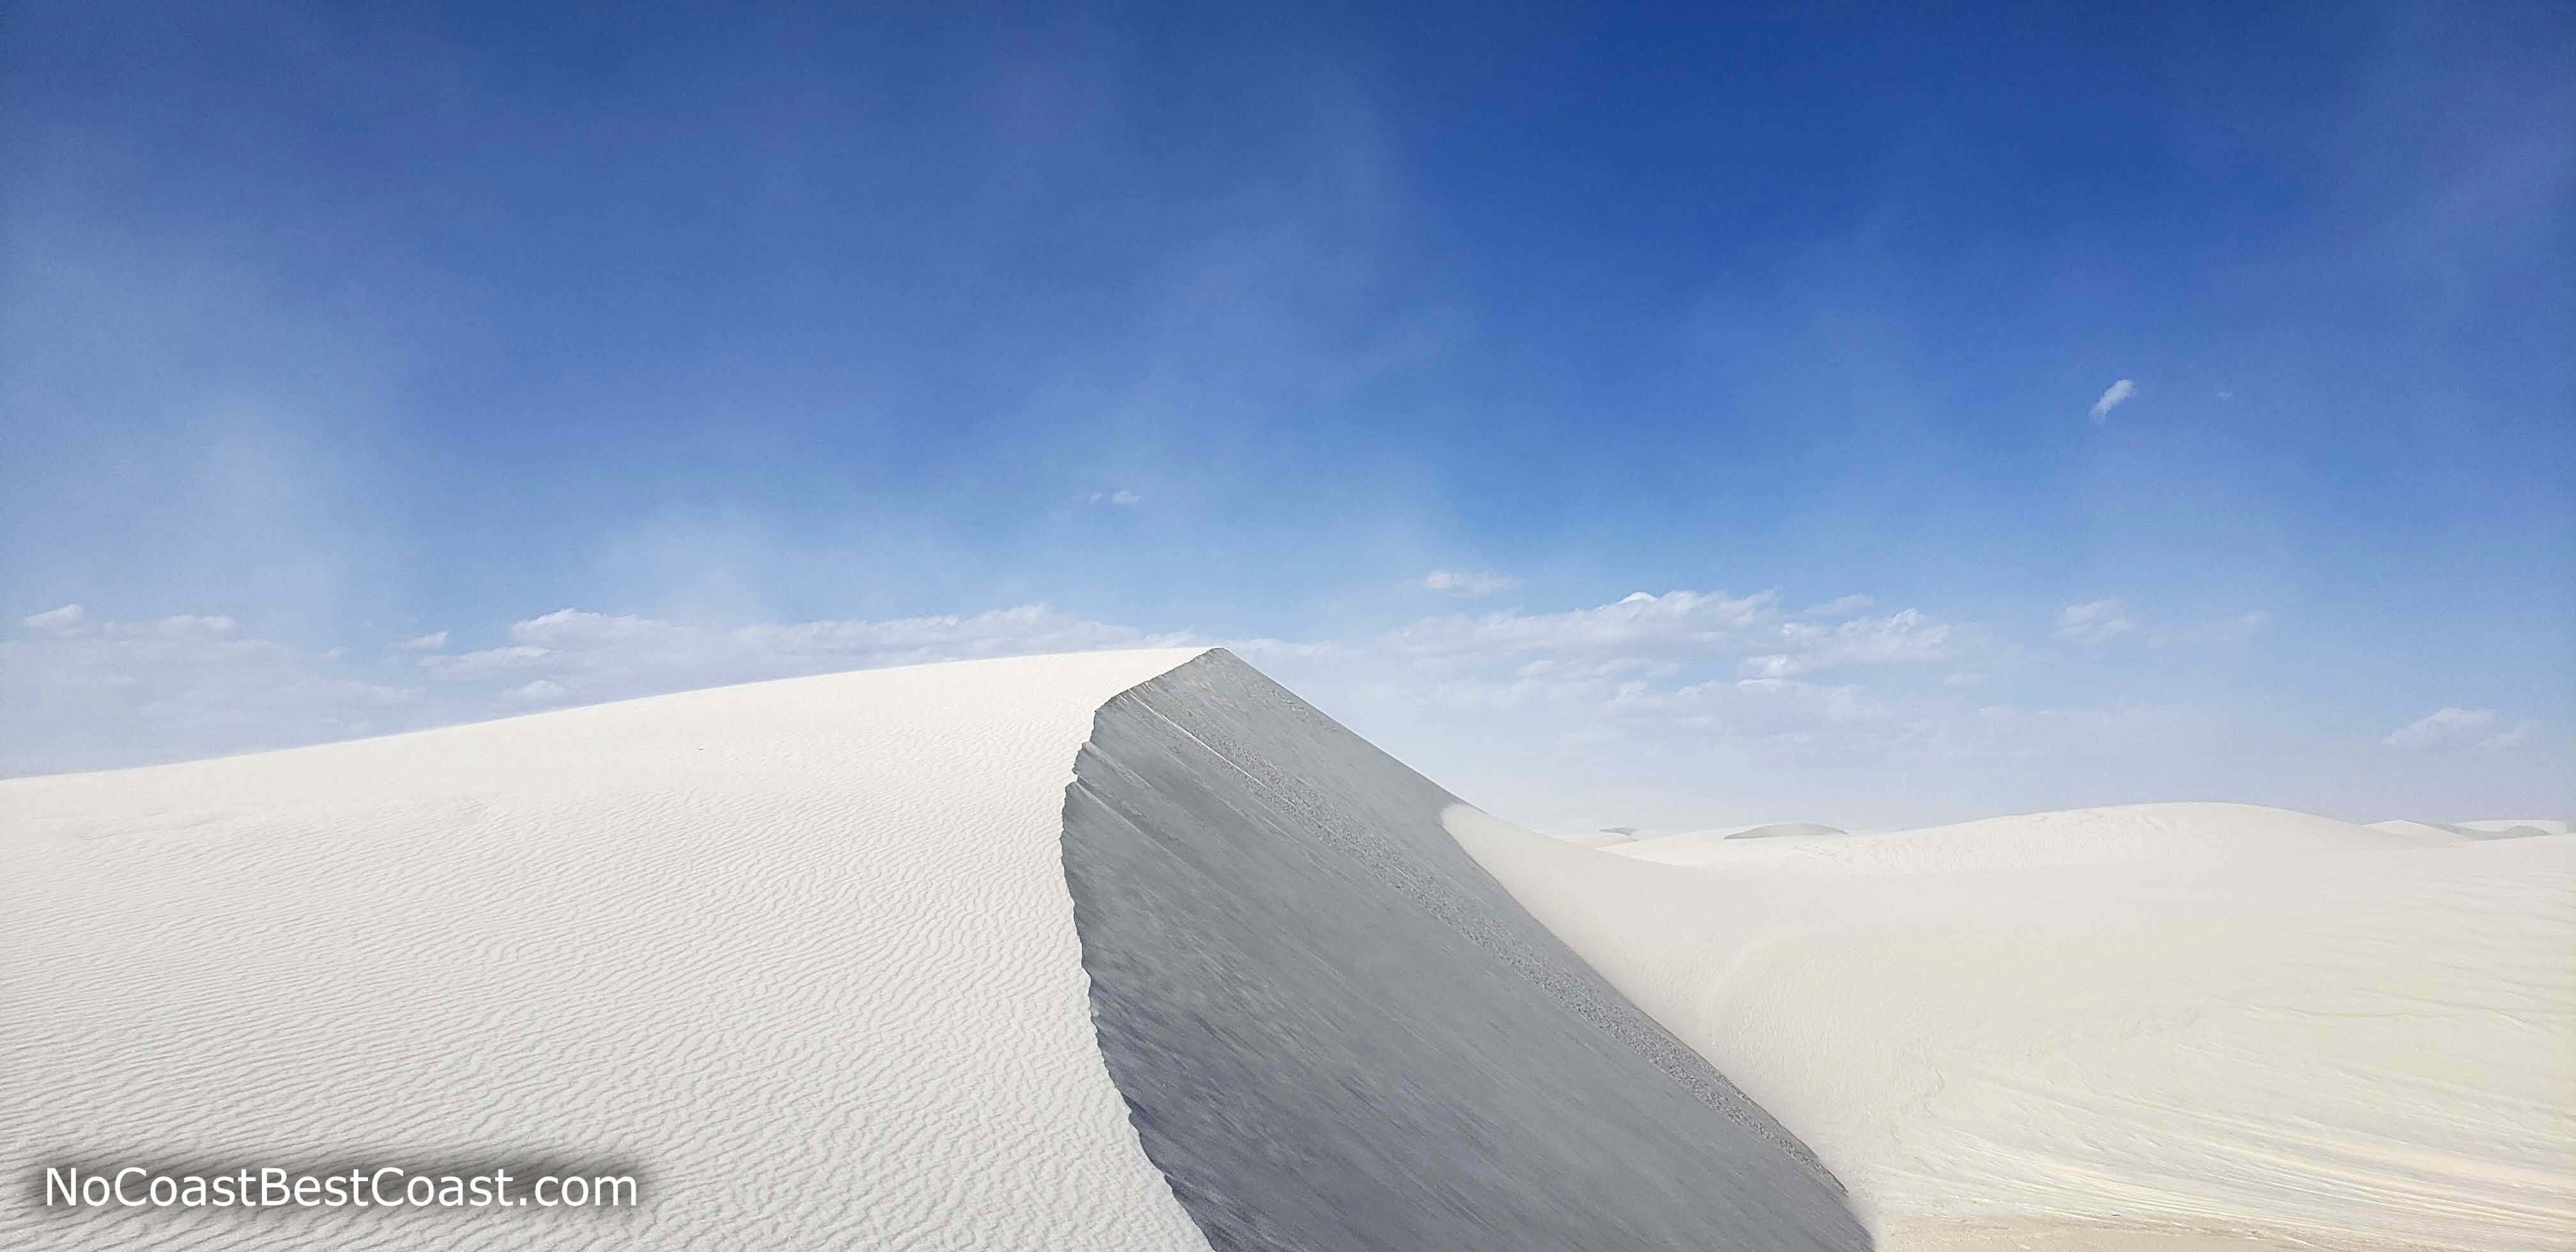 The crest of one tall dune